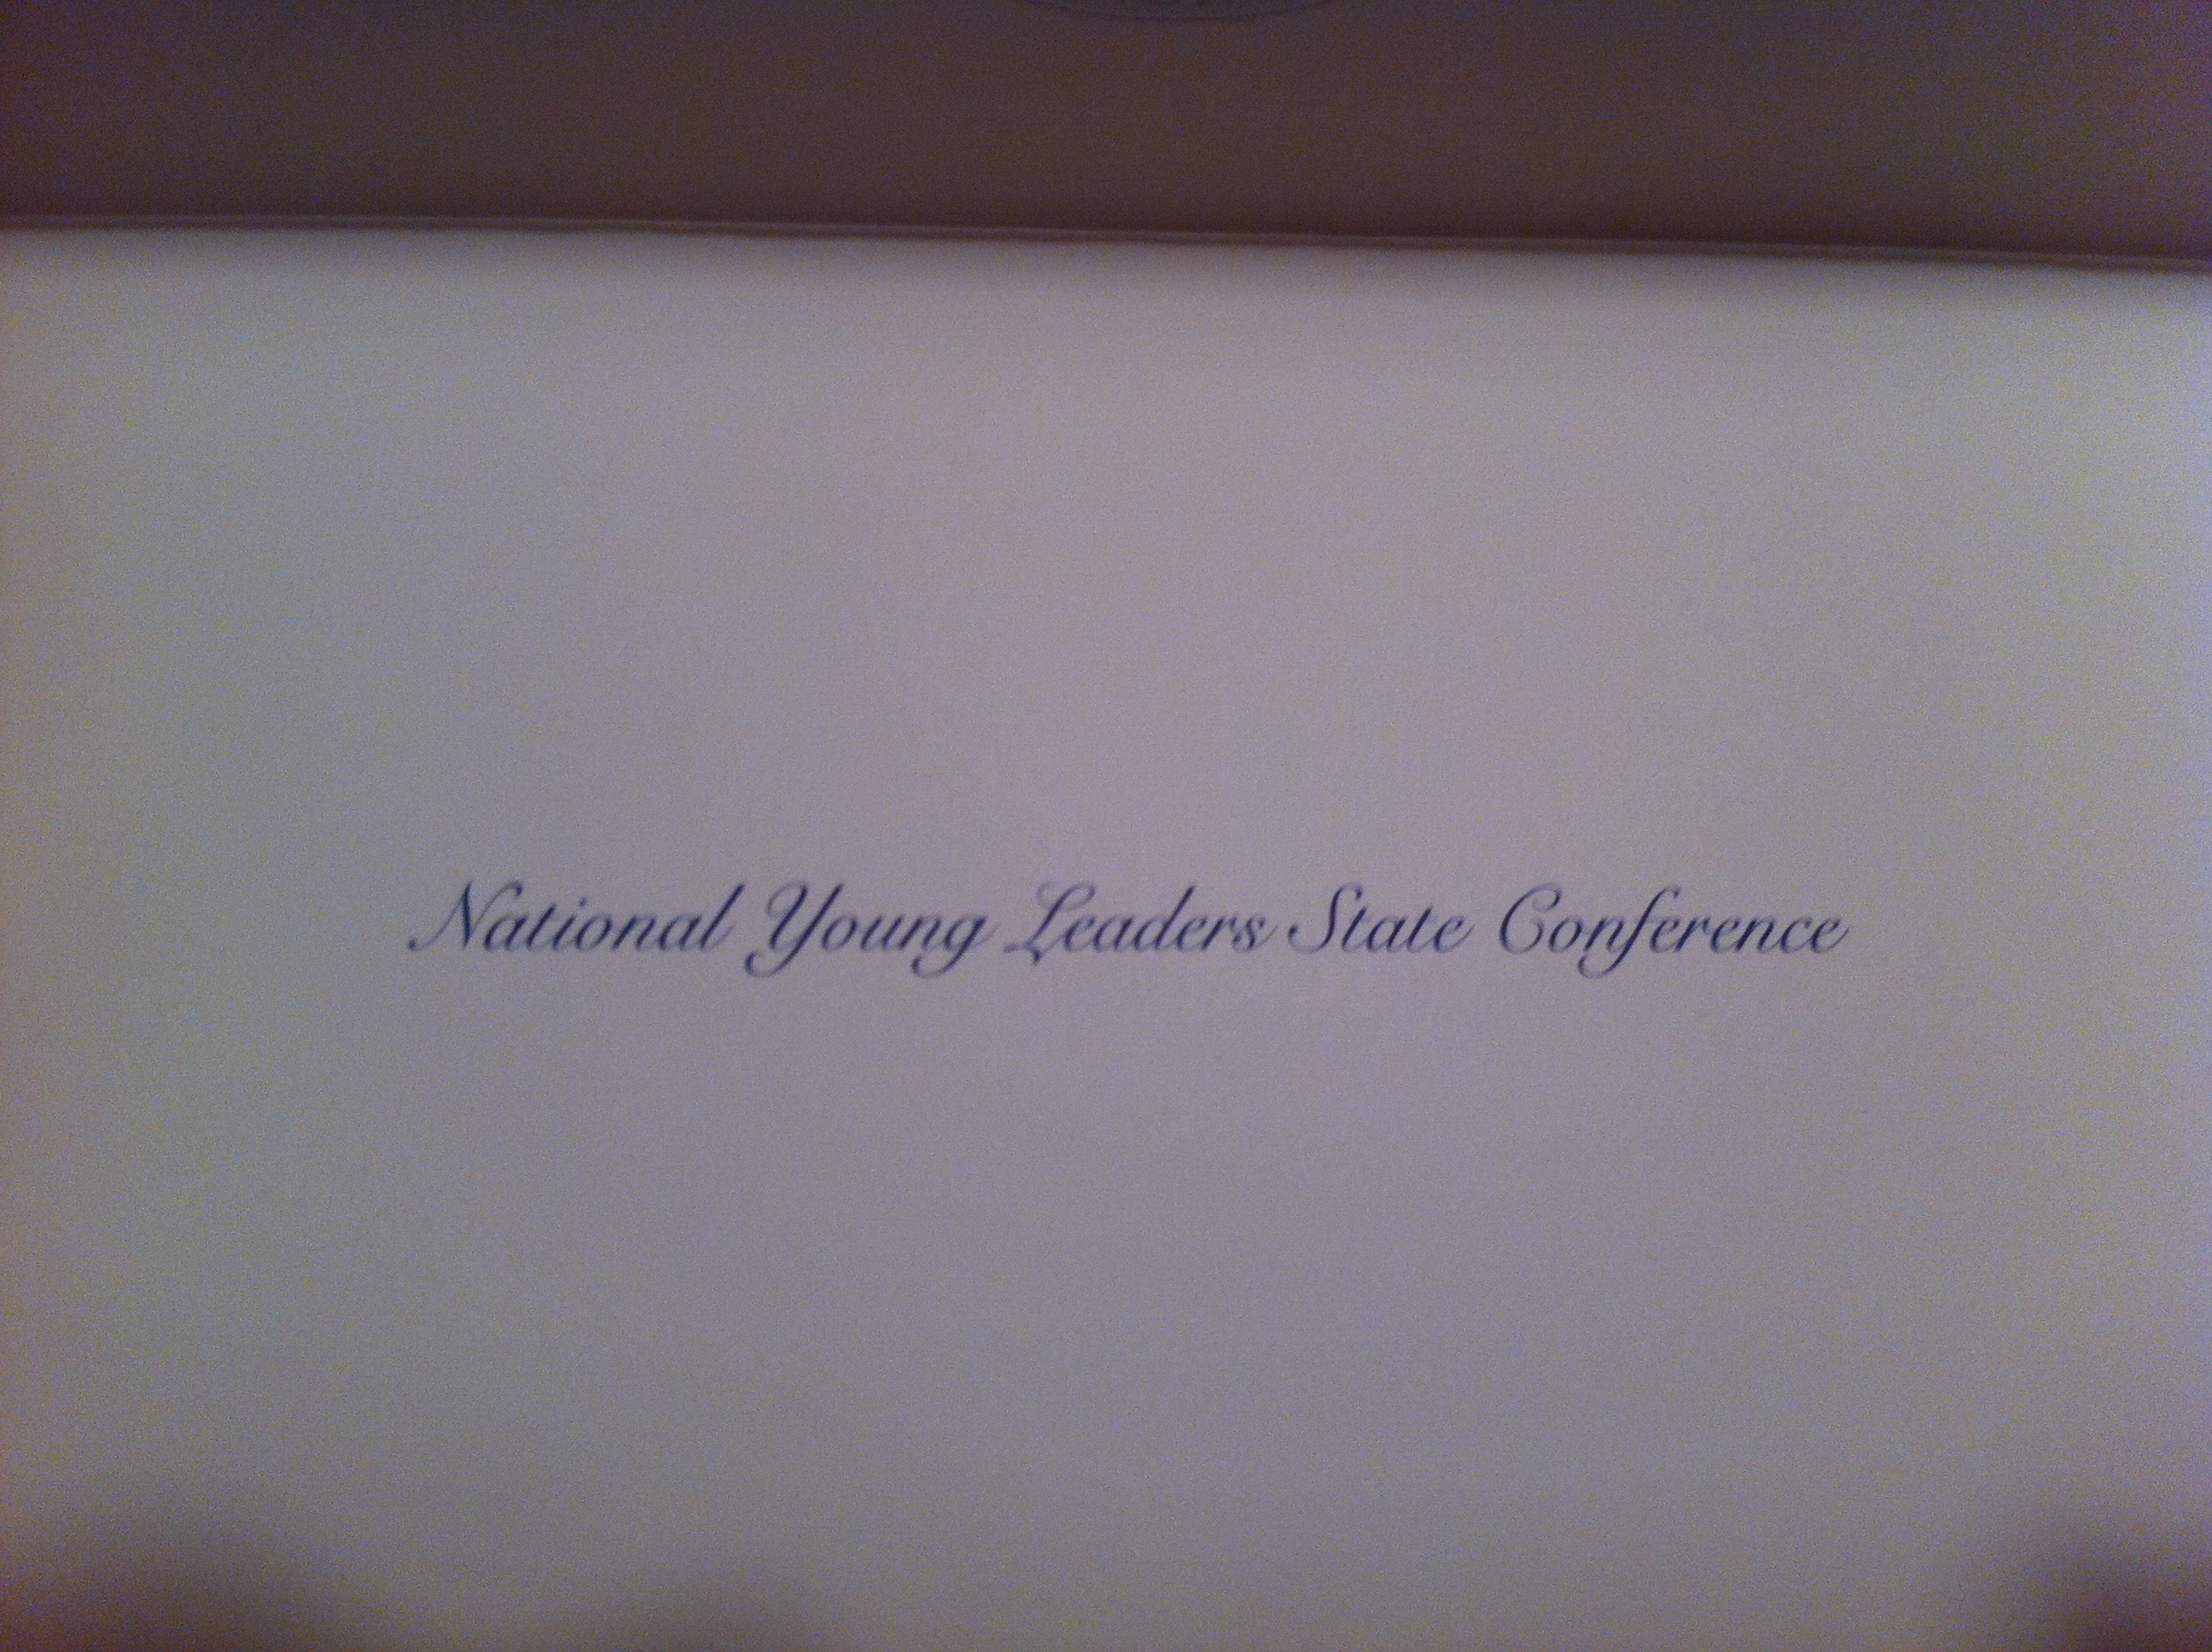 National Young Leaders Conference